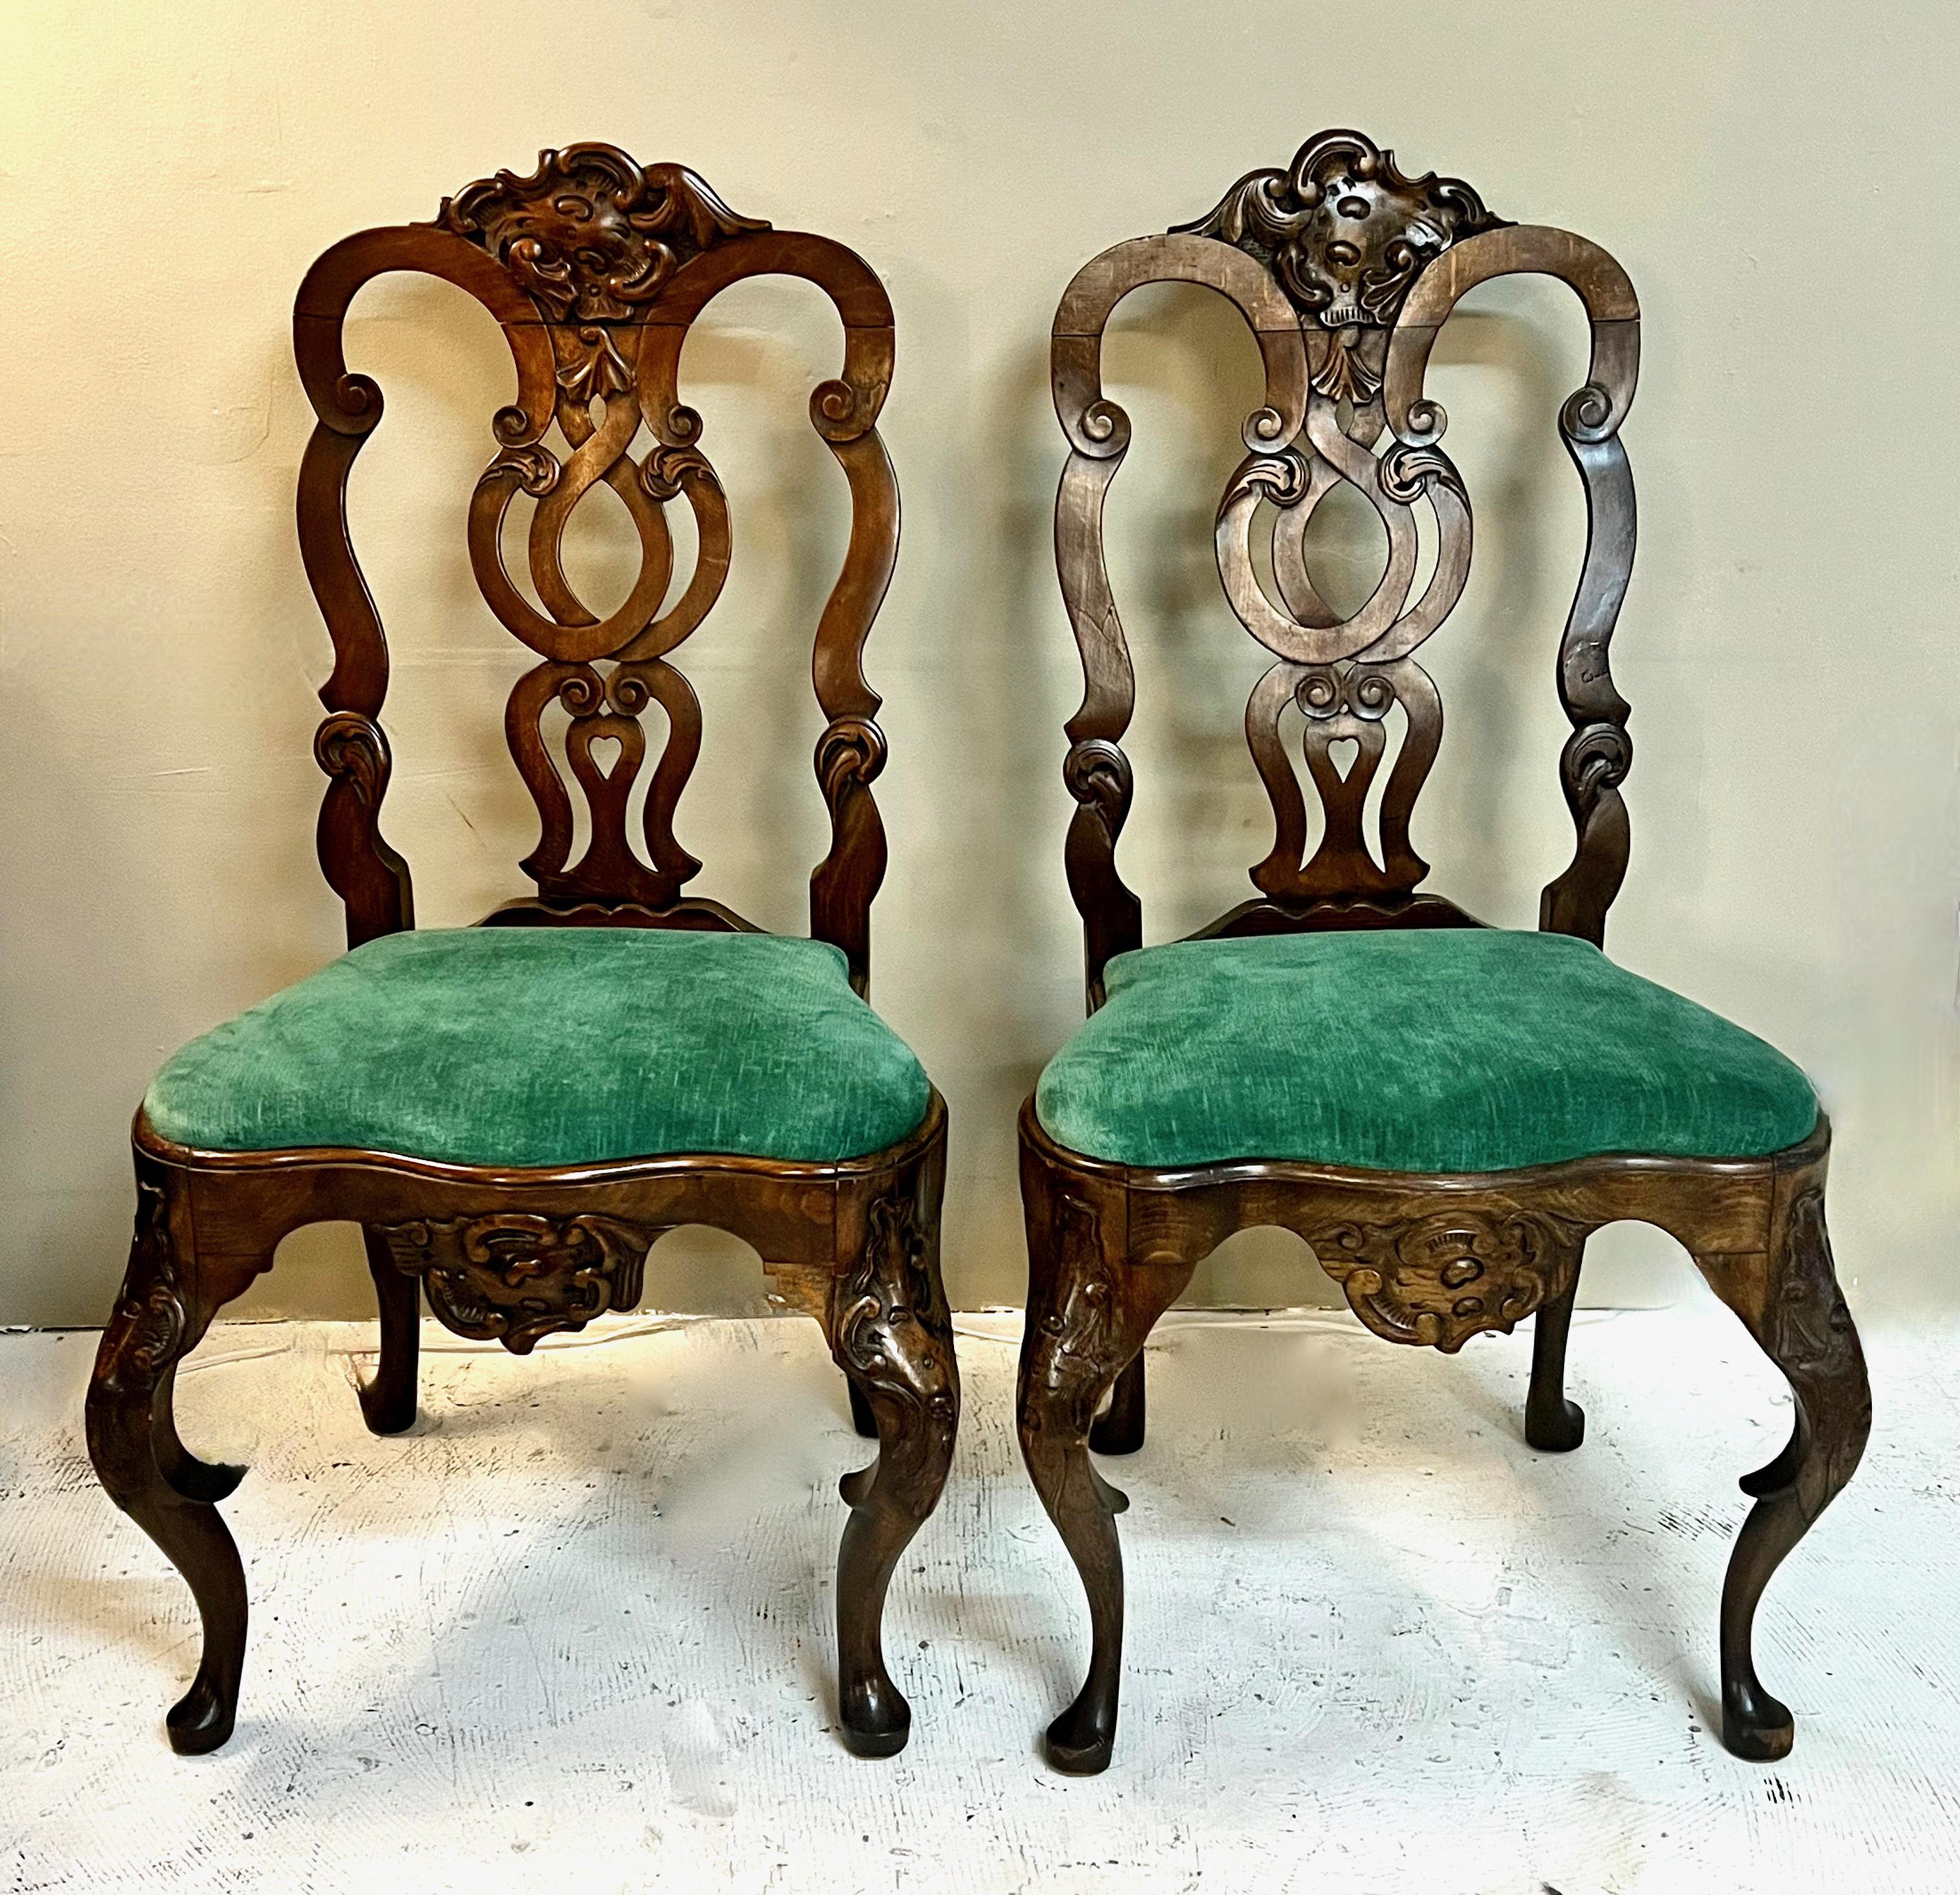 This is a great pair of carved Portuguese Oak Rococo side chairs. These chairs are beautifully carved with exaggerated cabriole legs detailed with carved knees, stirrups and pad feet. The center splat is whimsical with its scrolling carved openwork.